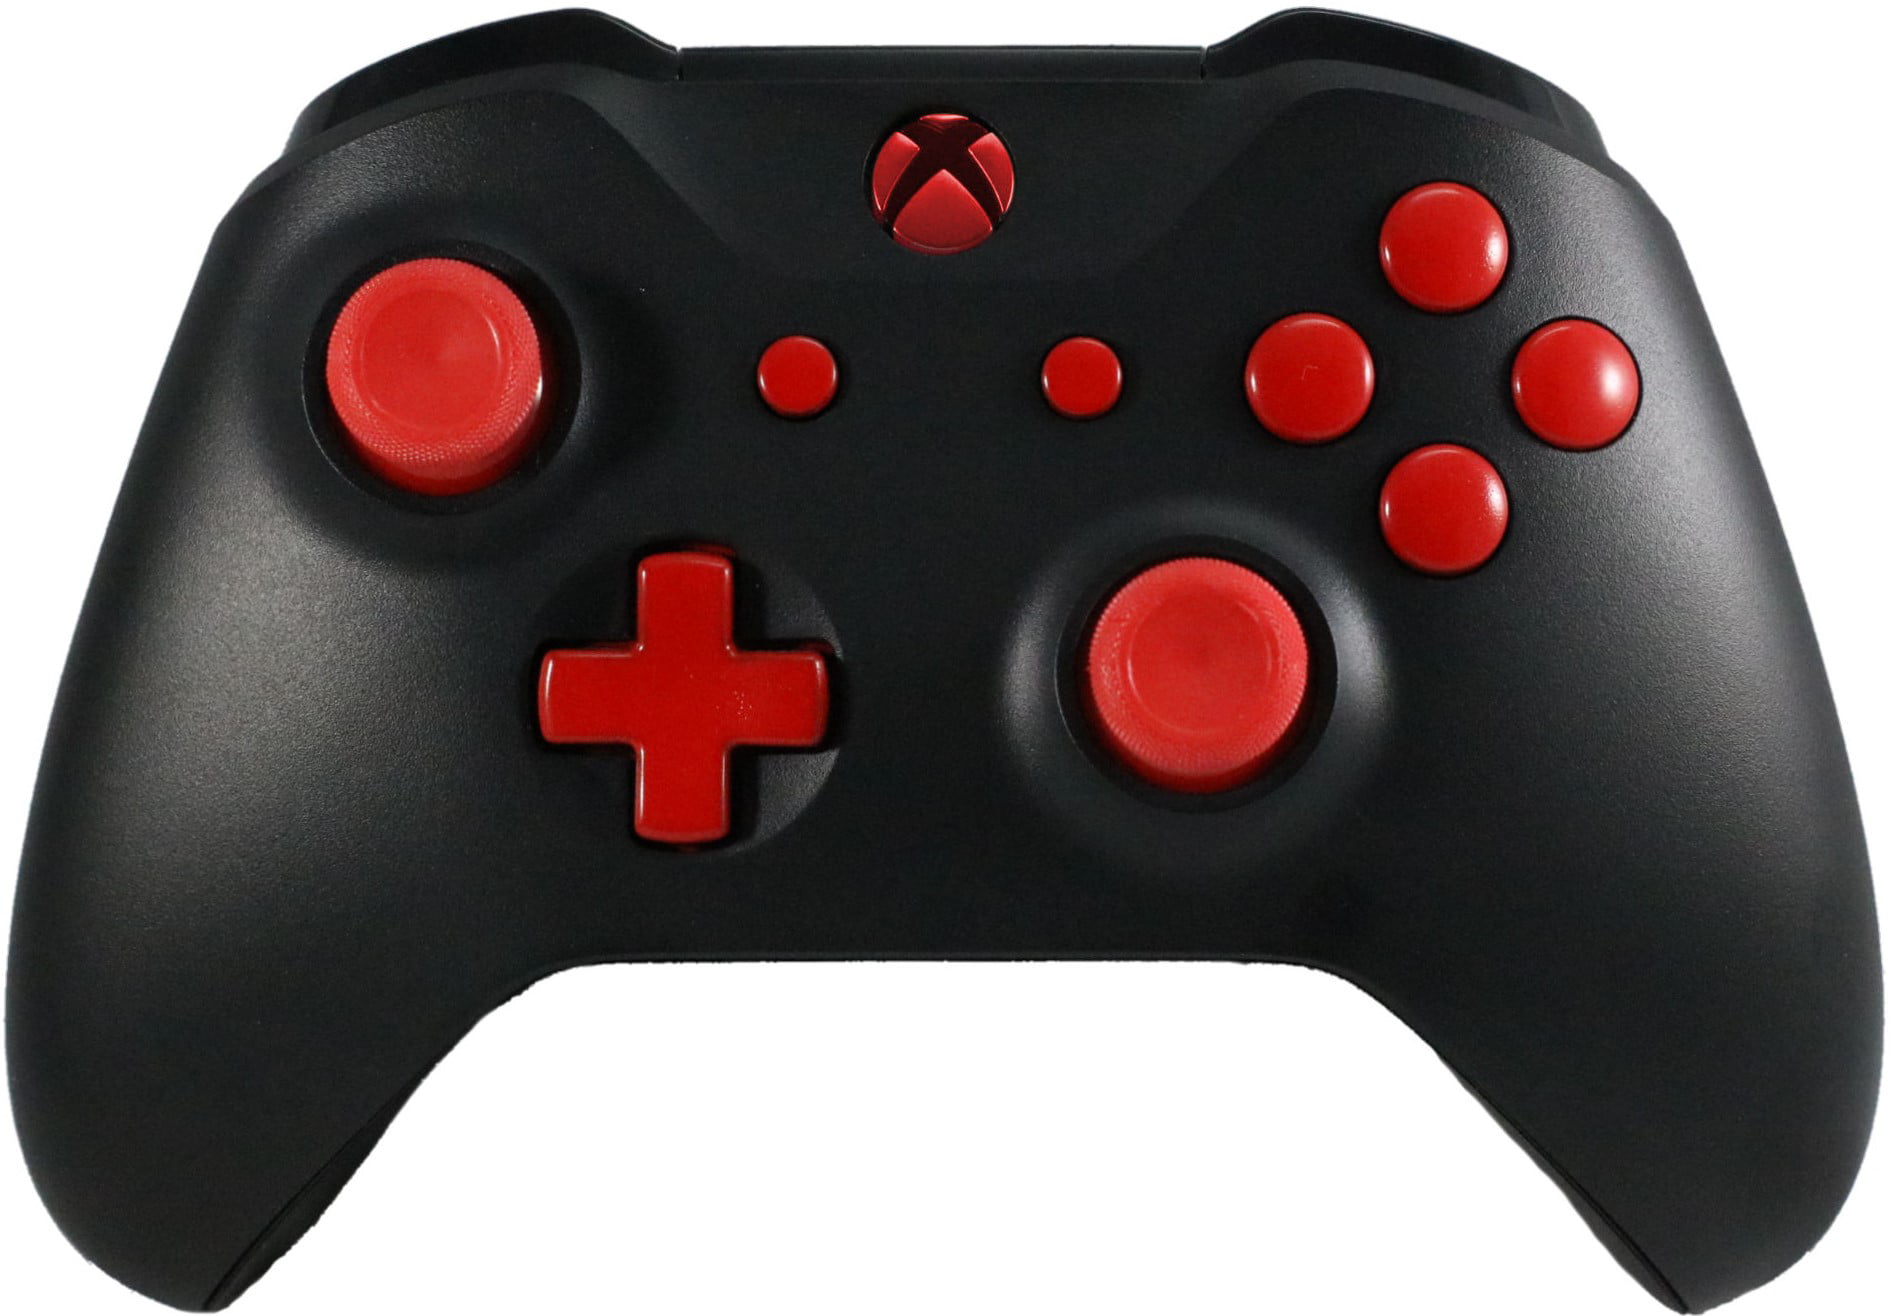 red xbox one controller